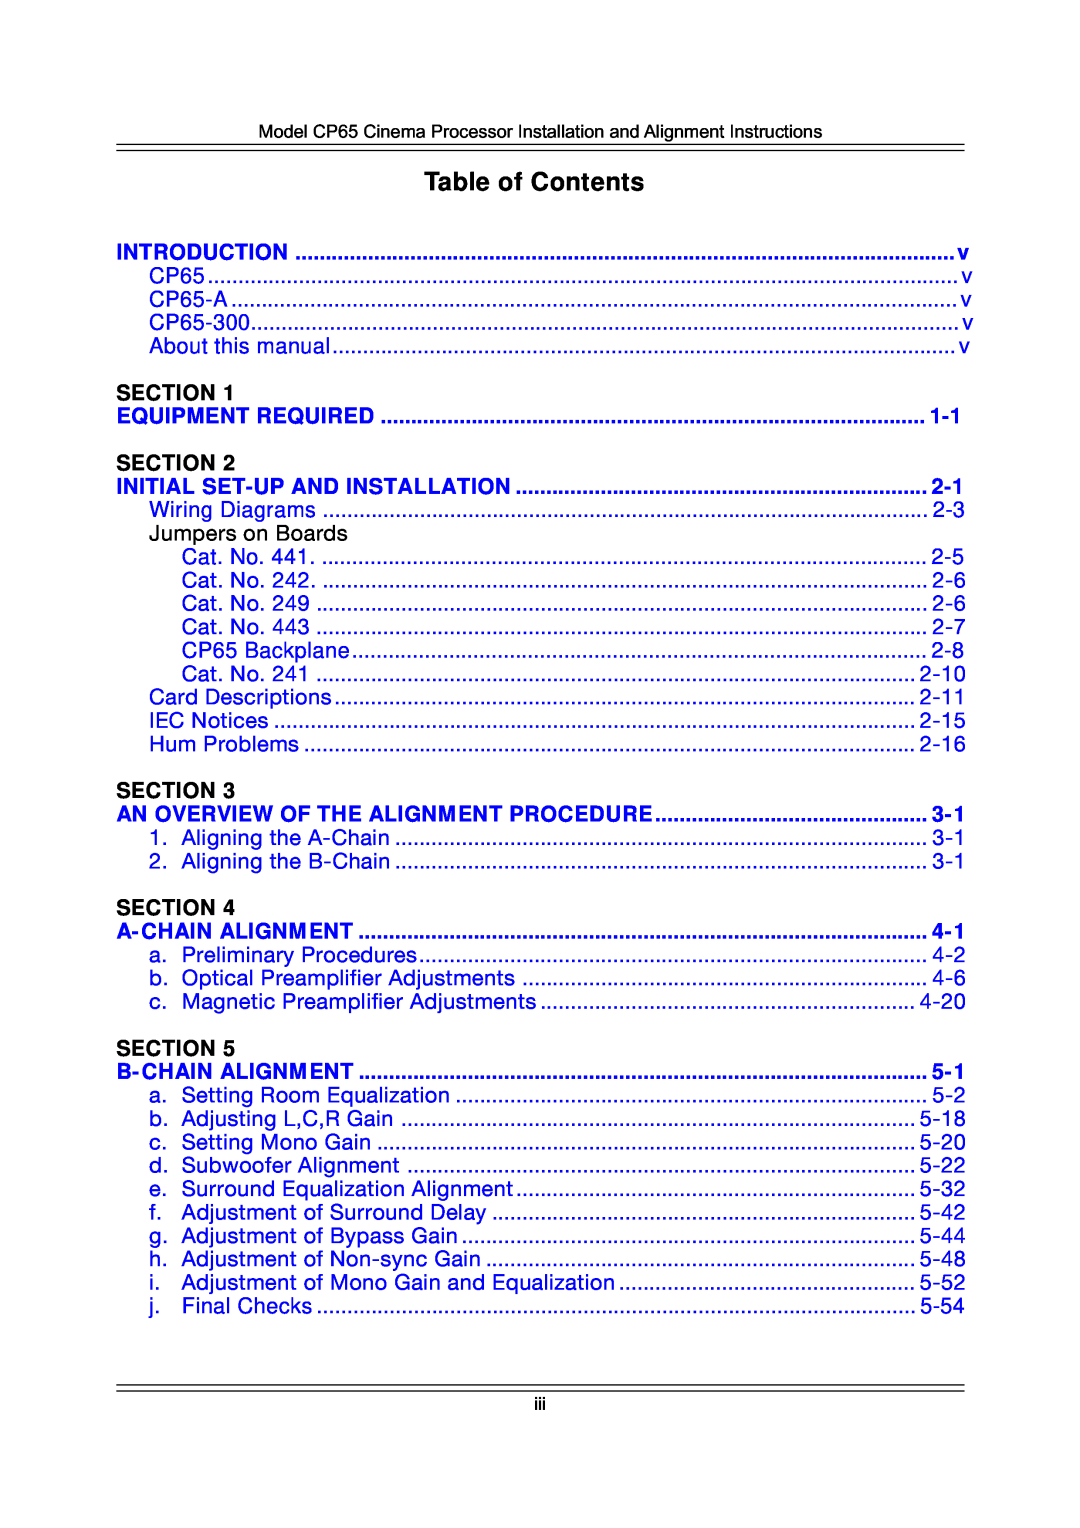 Dolby Laboratories CP65 manual Table of Contents, Introduction, Equipment Required, Initial Set-Upand Installation 